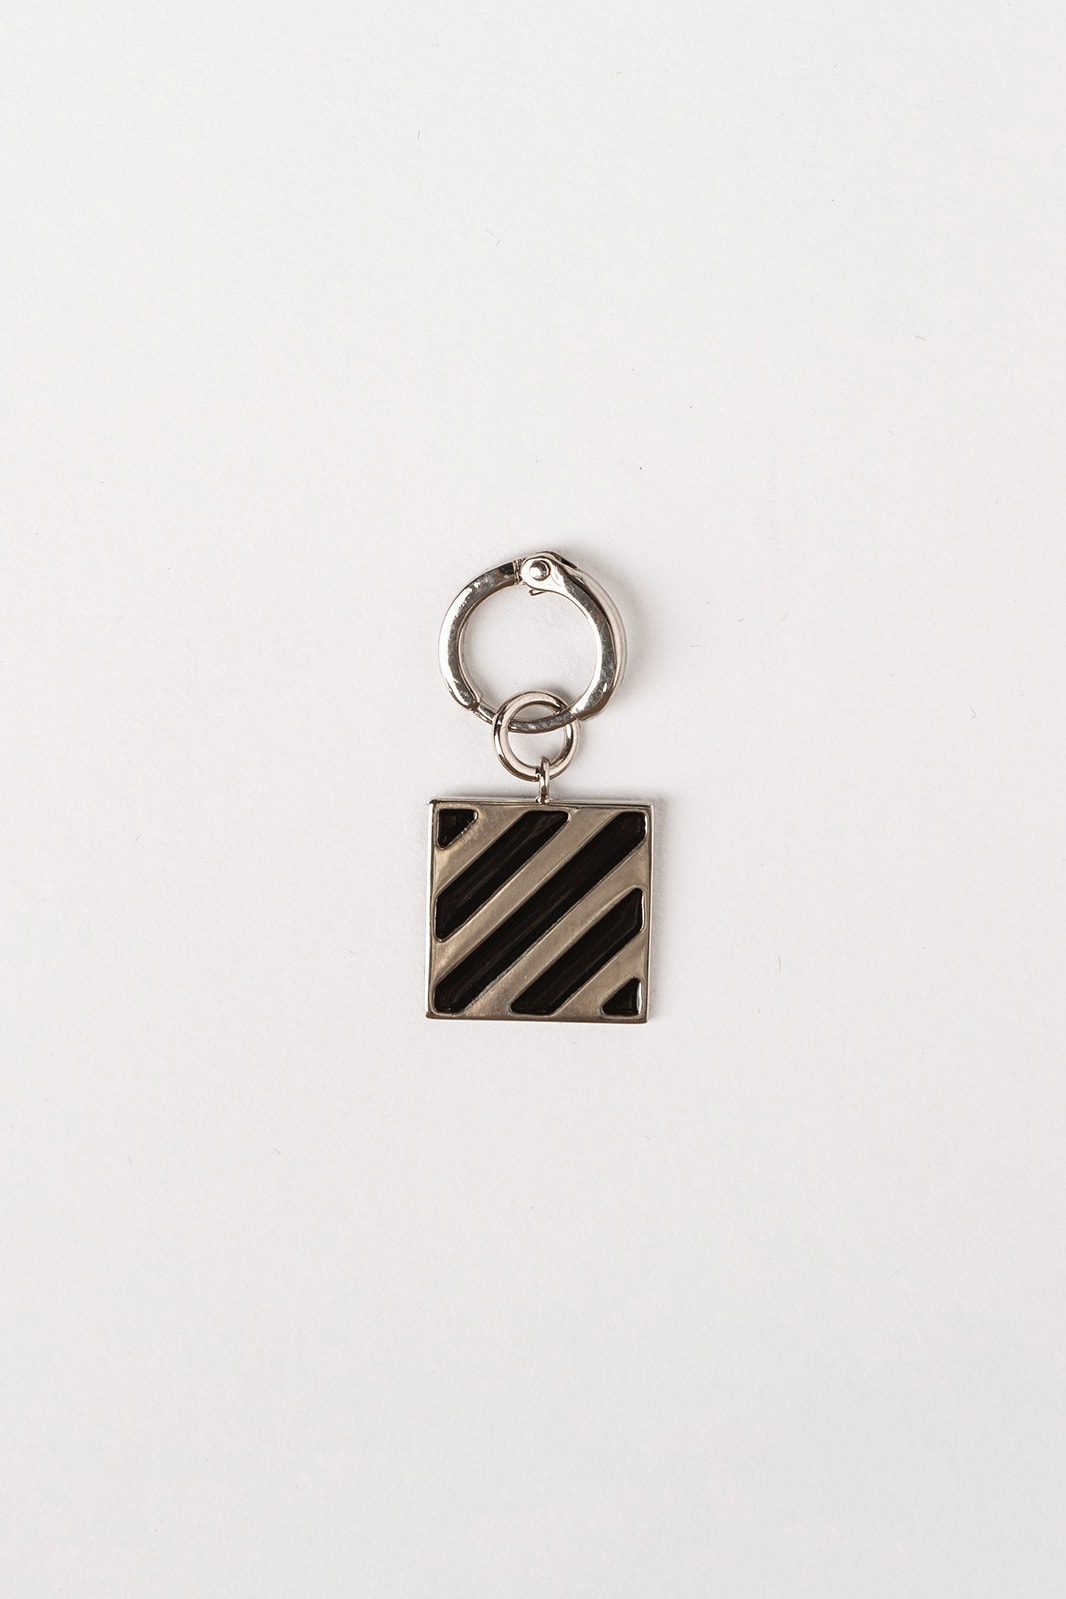 Off White Jewelry Collection Keychain Silver Black